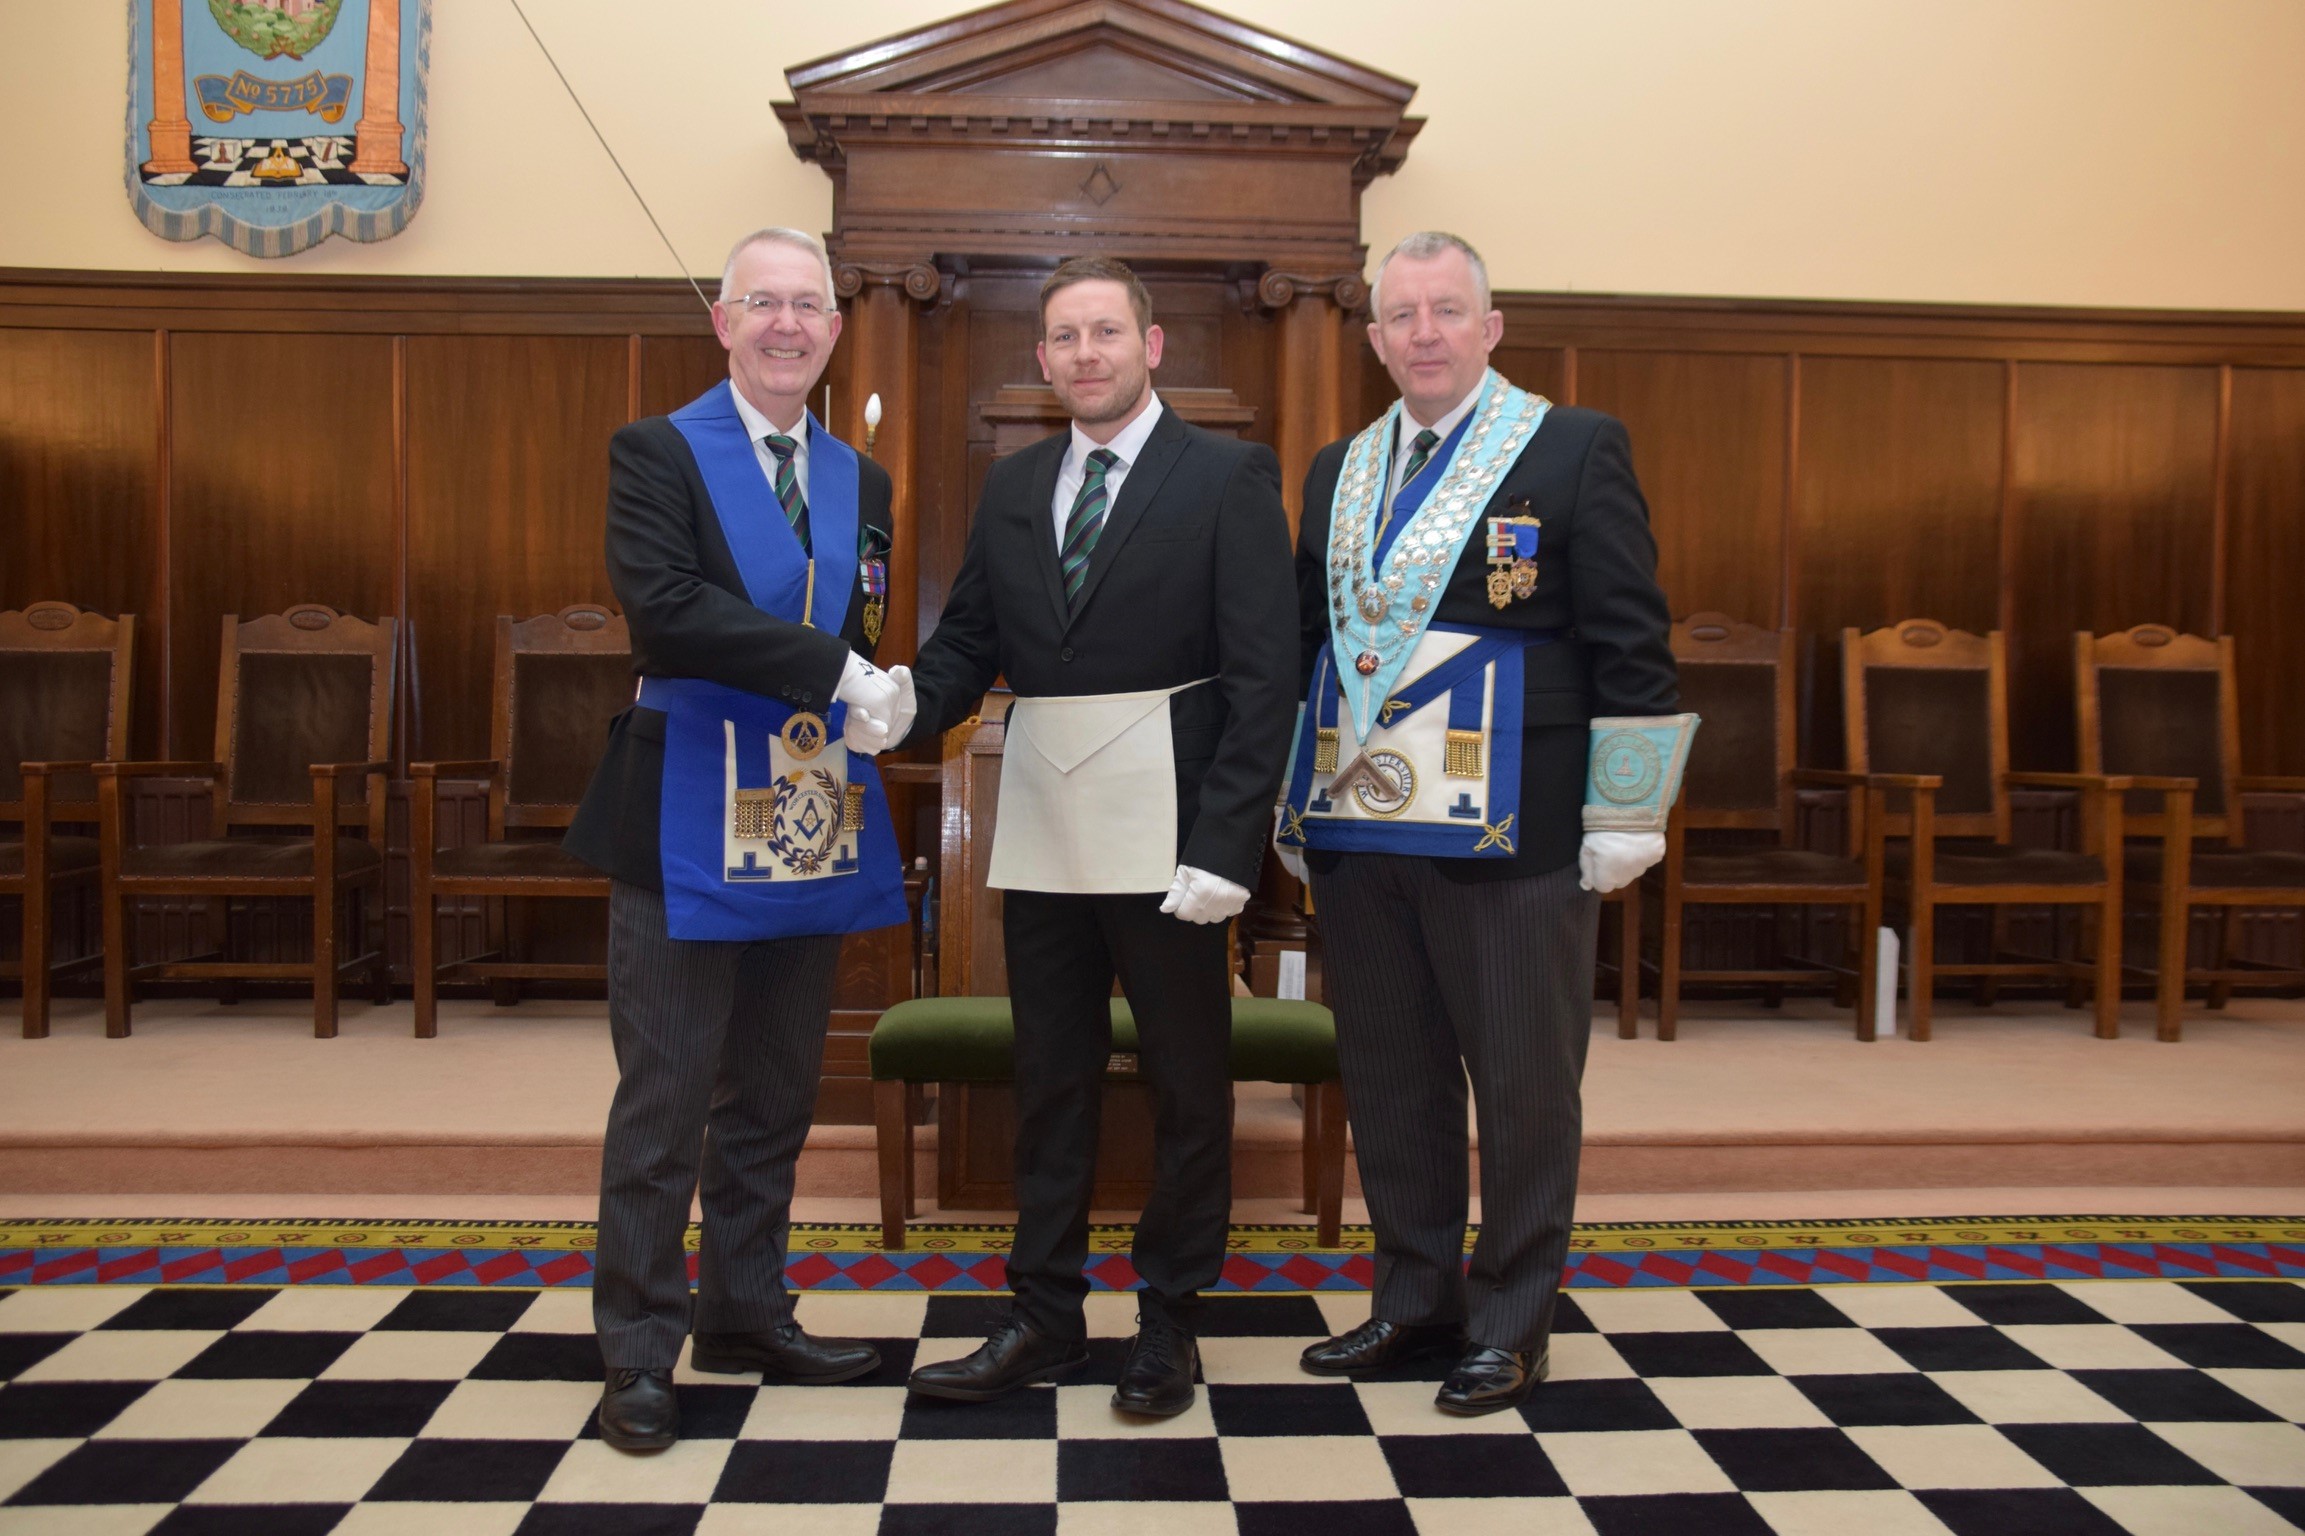 Provincial Grand Master of Worcestershire Installed new Worcestershire Freemasons Paul Walker 